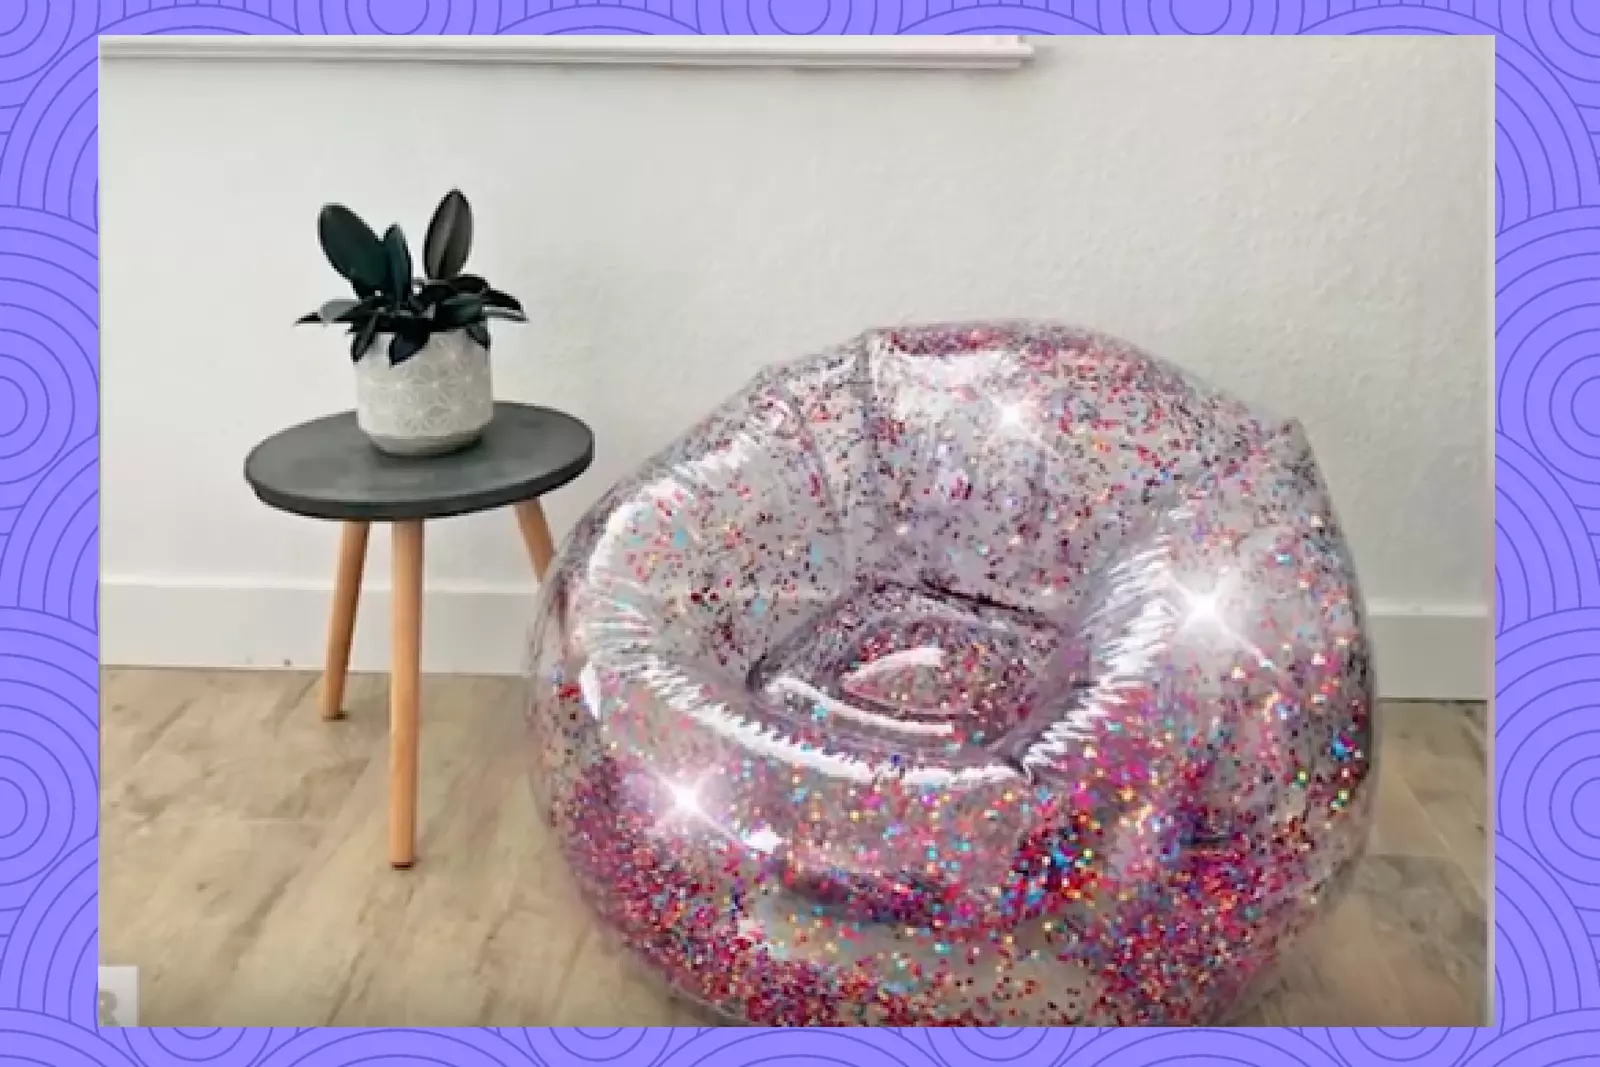 Inflatable Furniture Is Back